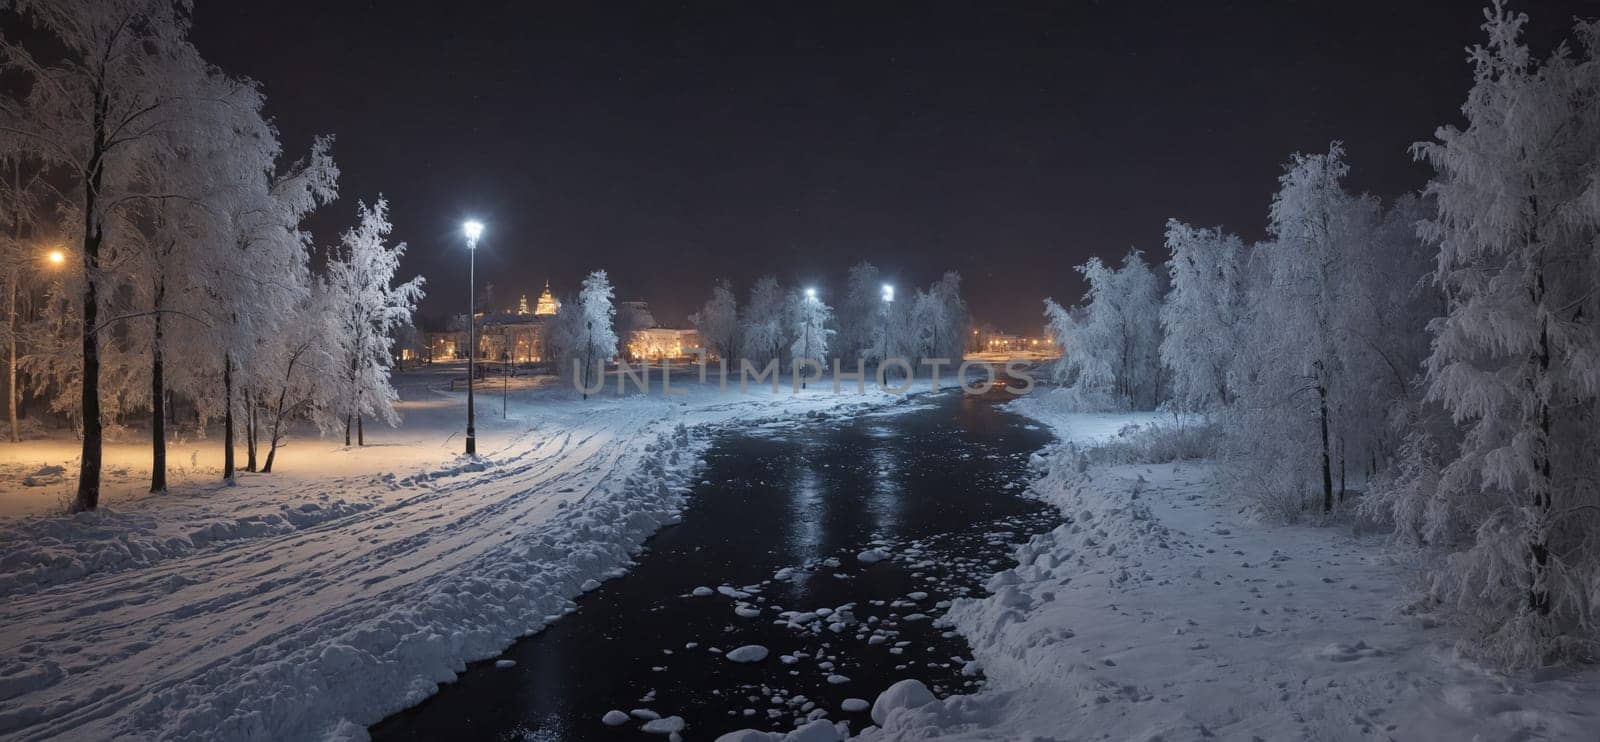 A freezing snowy road at midnight with a street light illuminating the dark landscape, creating a mesmerizing geological phenomenon in the sky